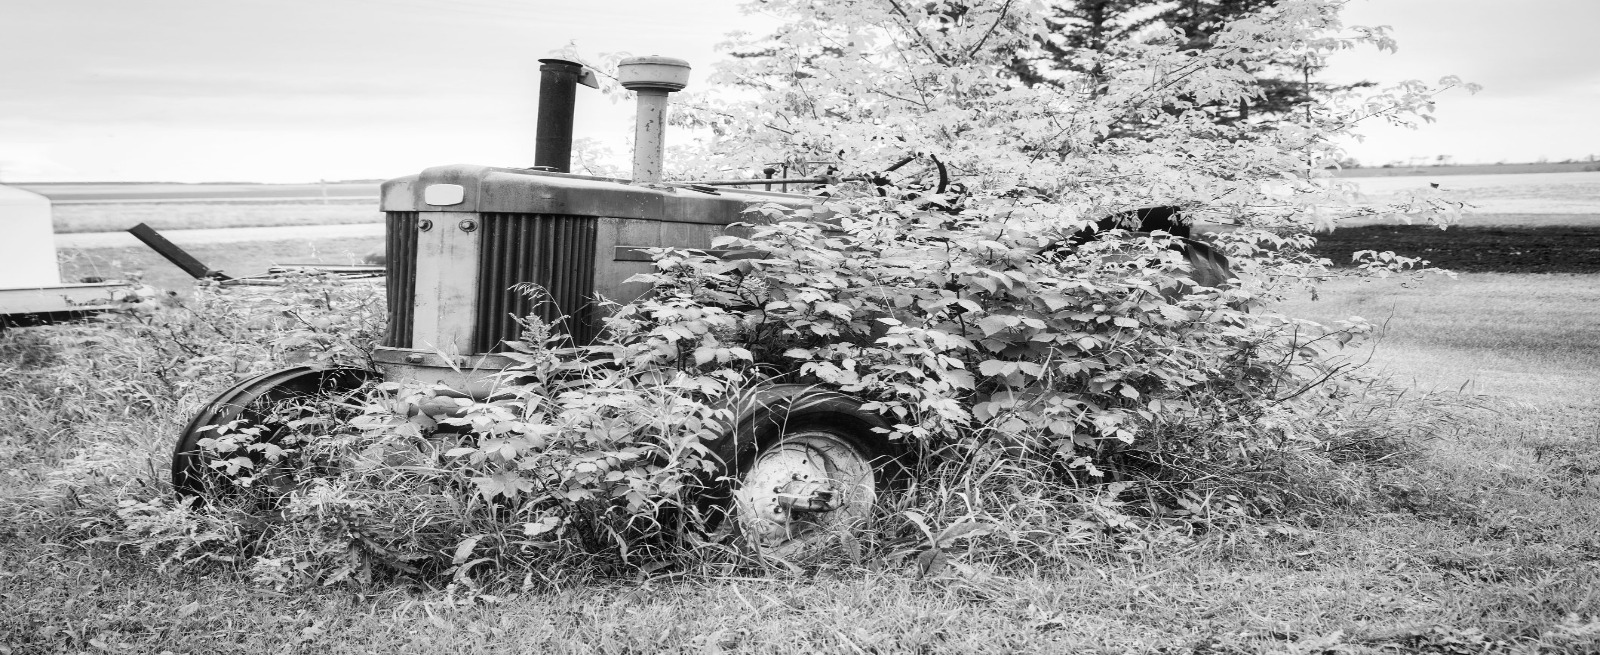 Tractor with trees grown around it